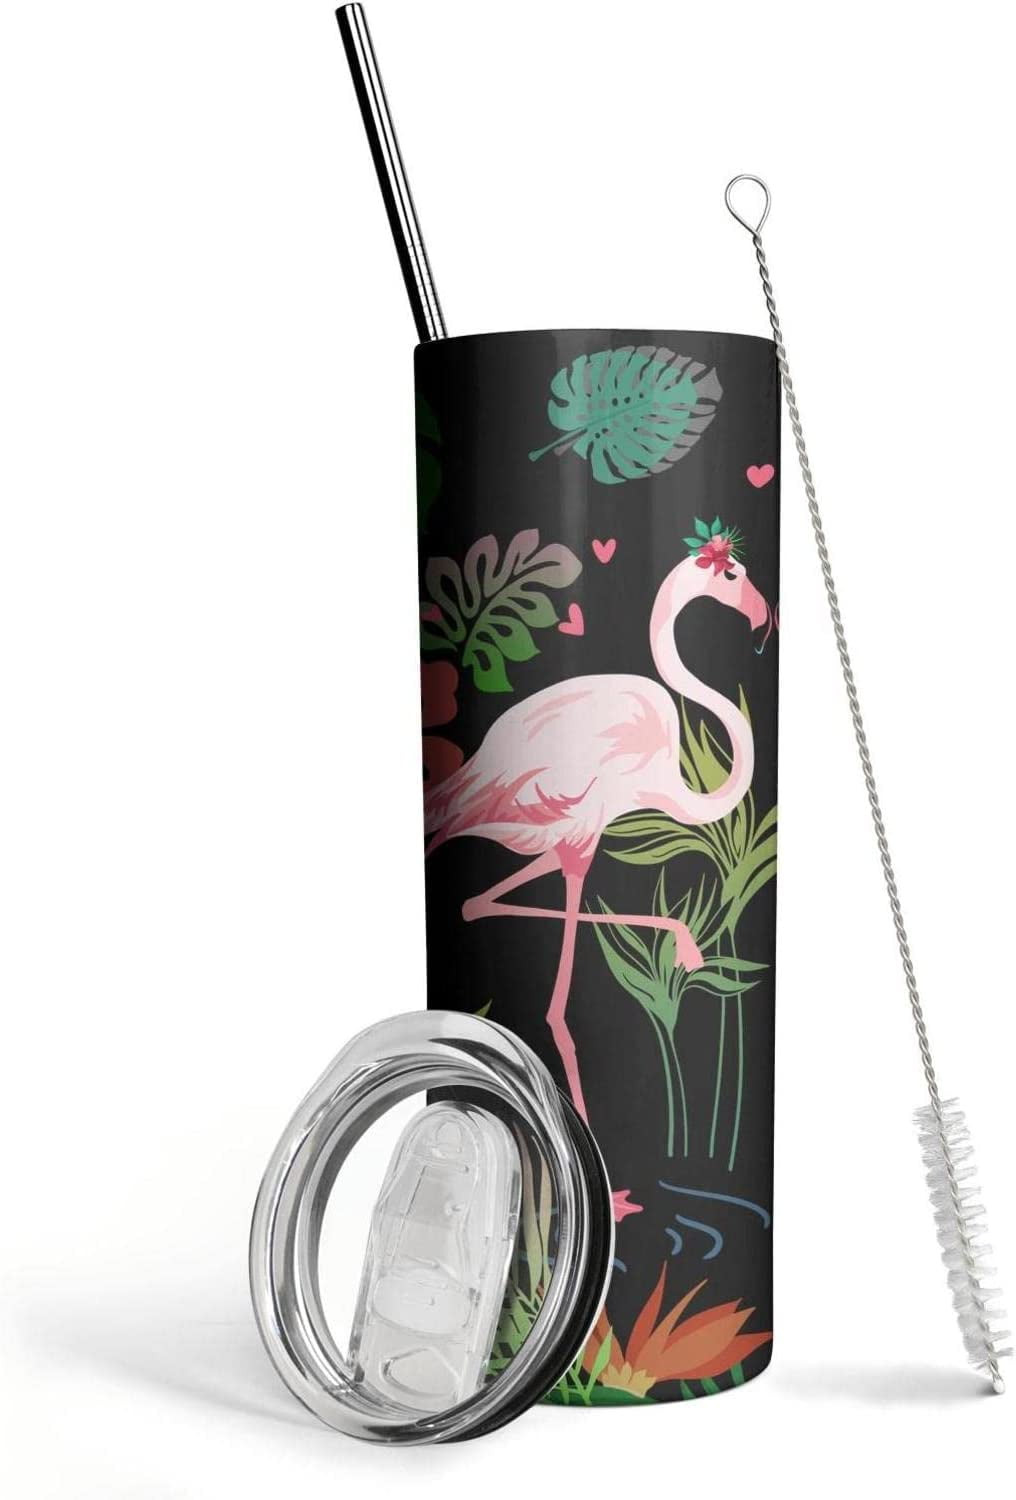 Acrylic Tumblers and Accessories – The Frazzled Flamingo